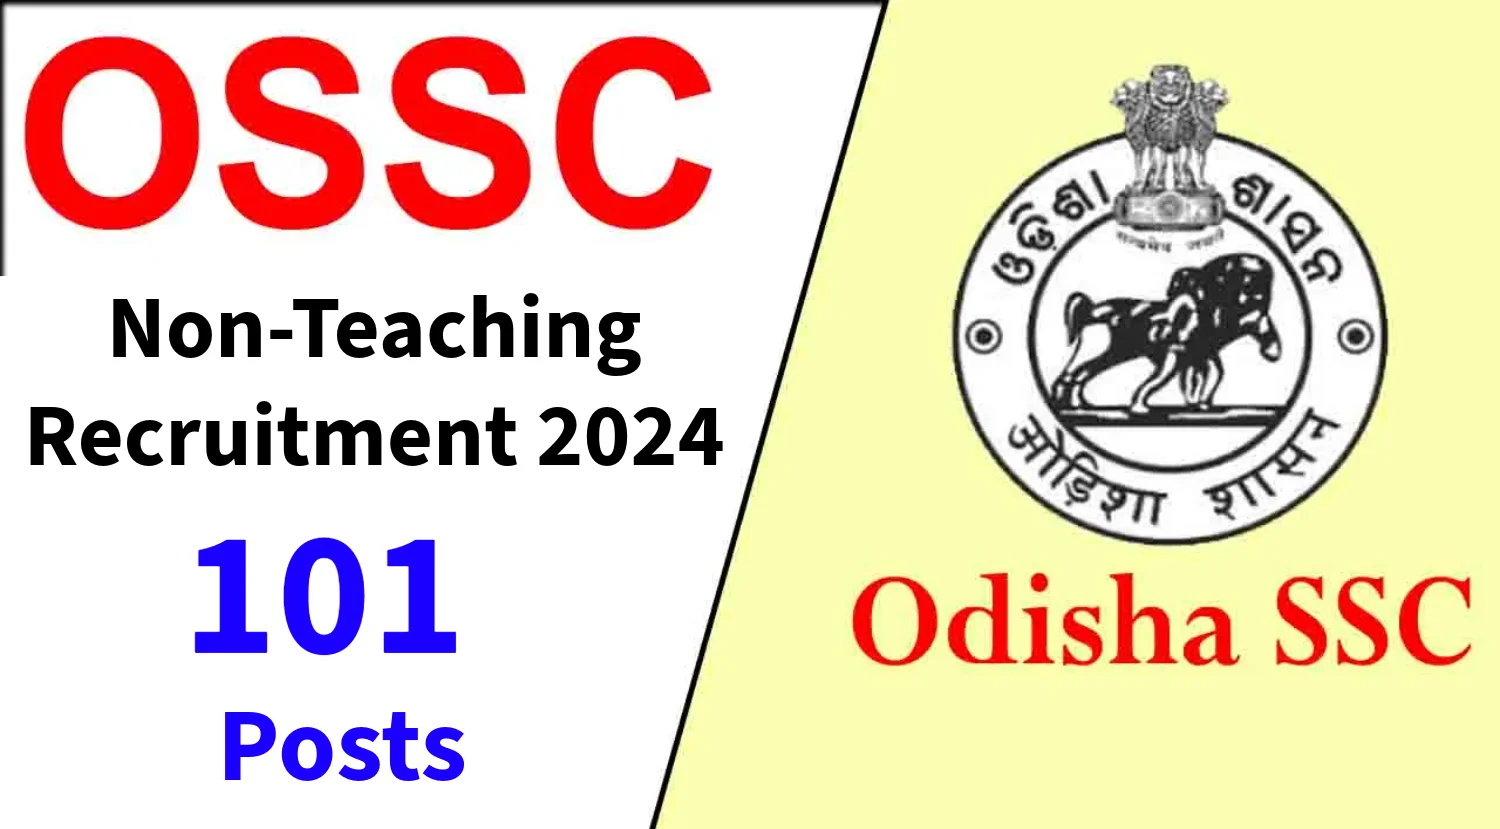 OSSC Non-Teaching Recruitment 2024 Notification Out for 101 Posts